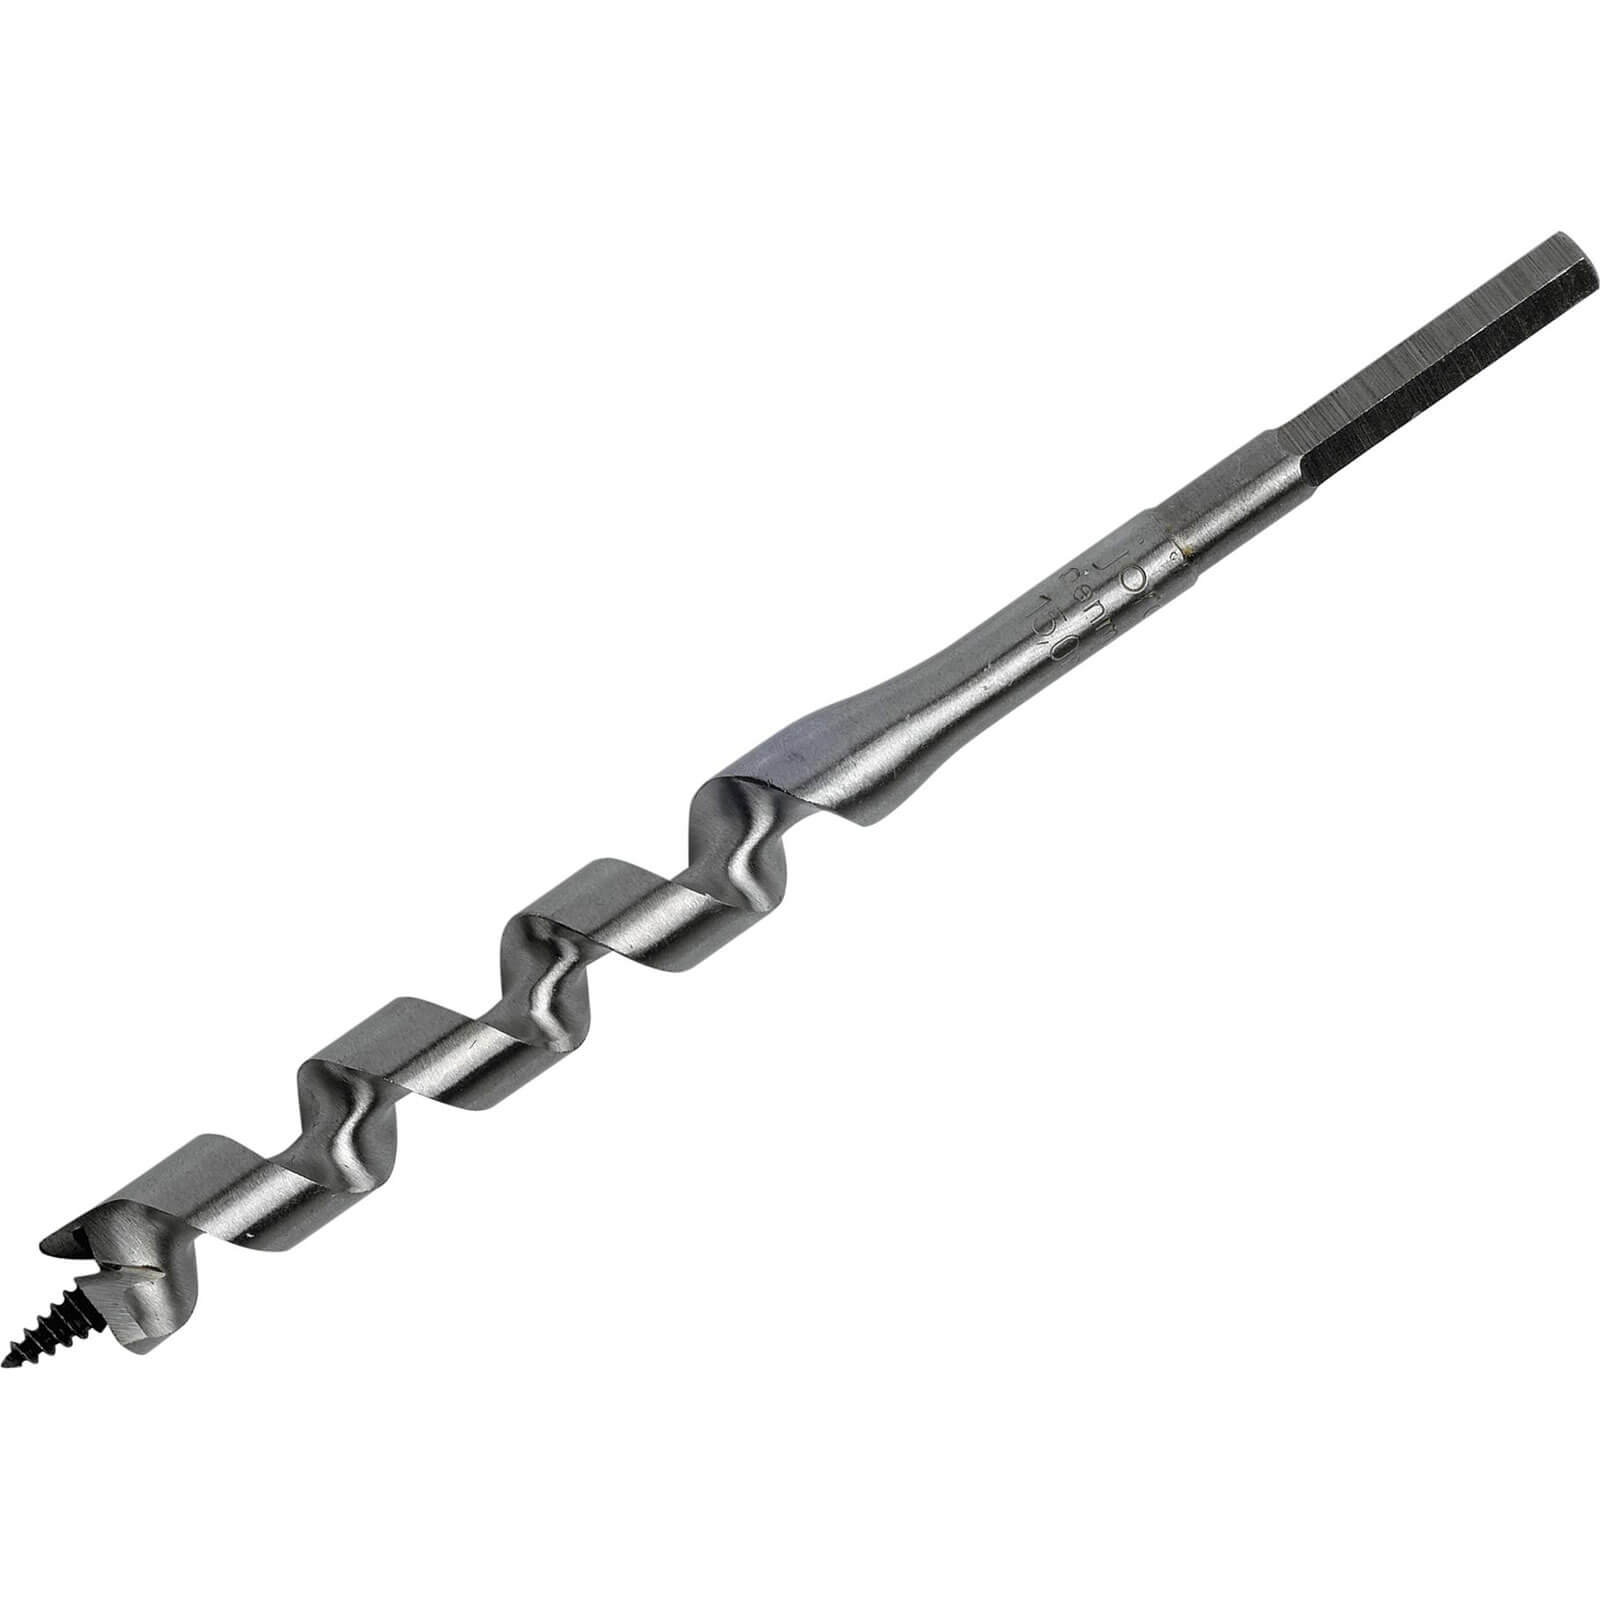 Image of Irwin Wood Auger Drill Bit 19mm 191mm